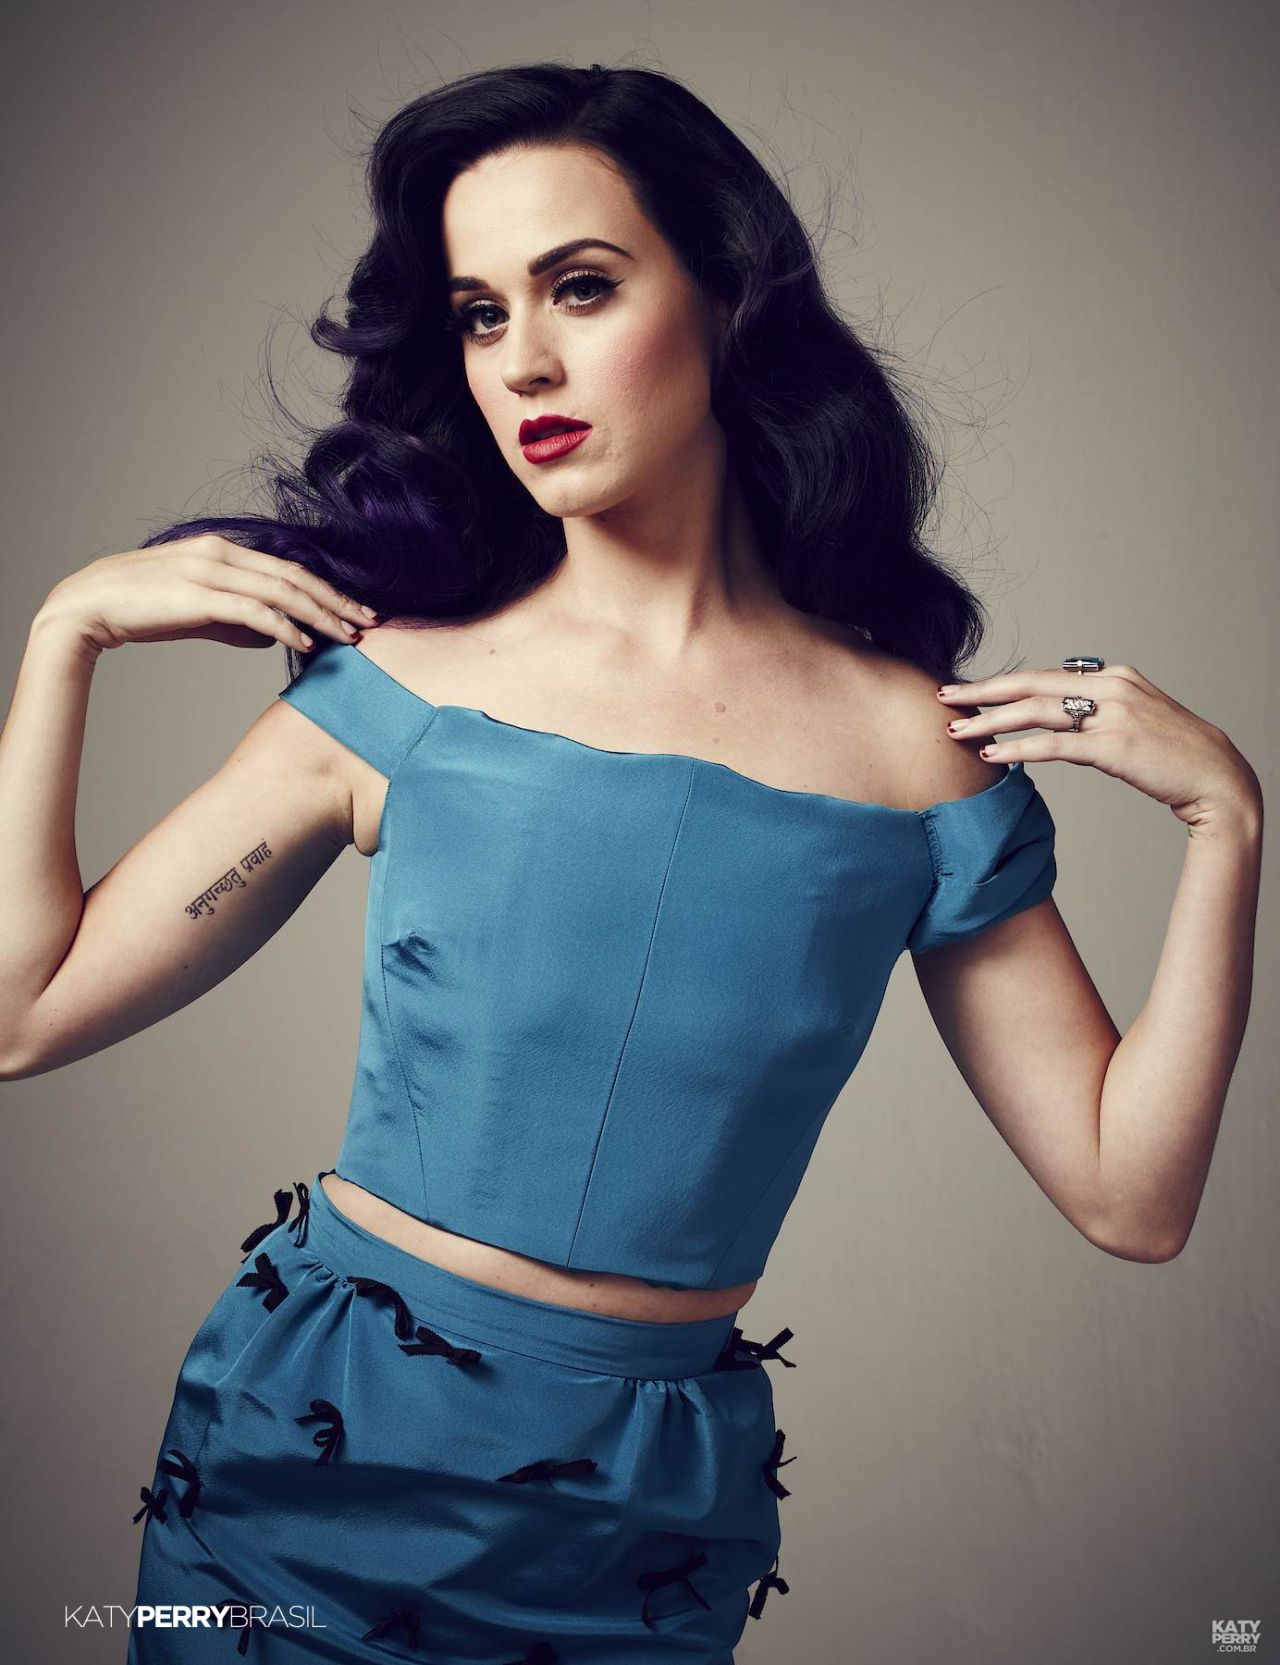 10+ Katy Perry Photoshoot Pictures